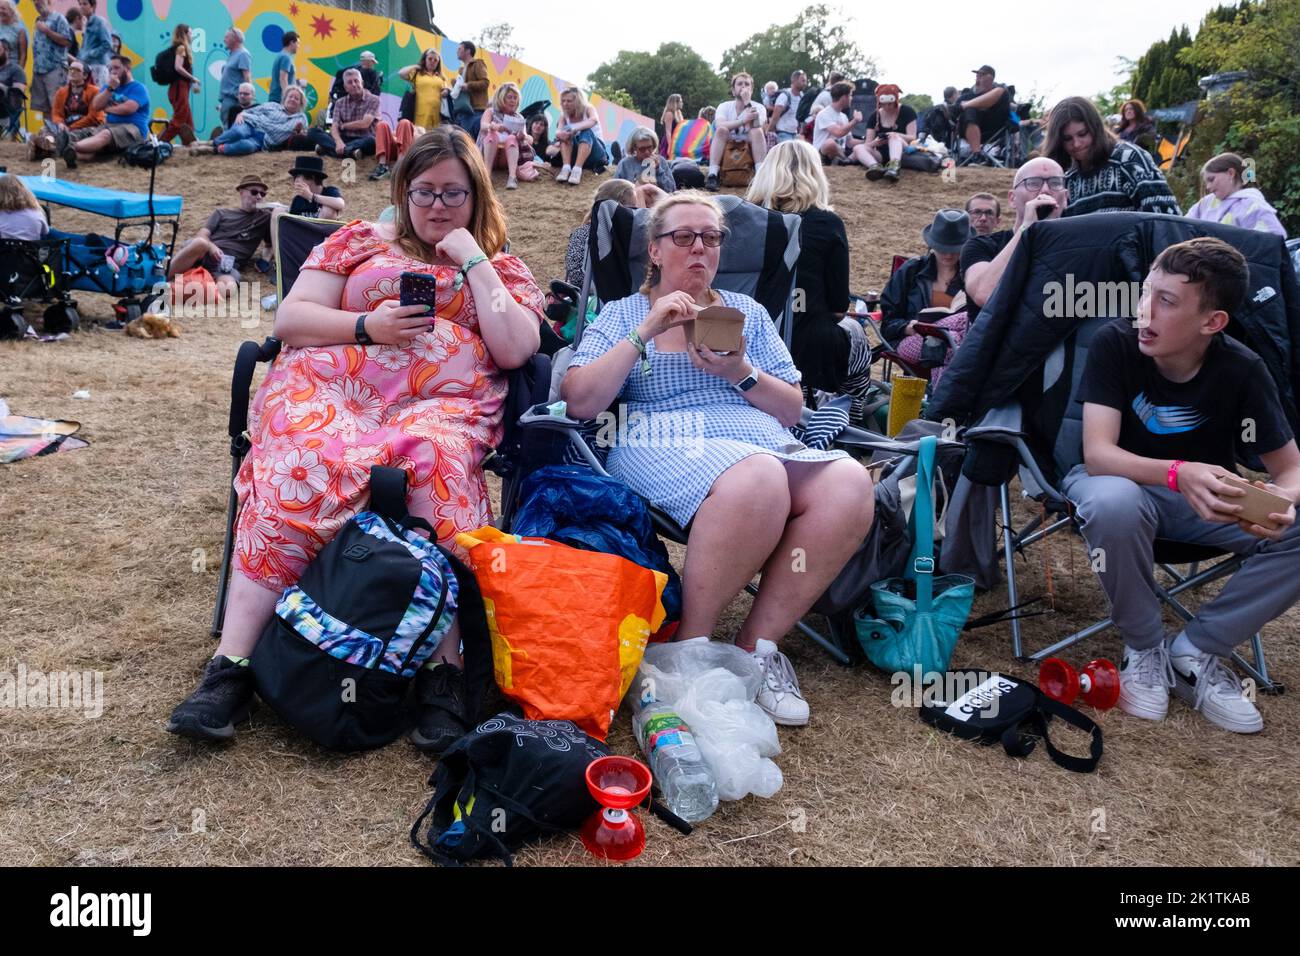 Fast food for the festival crowd at the Green Man 2022 music festival in Wales, UK. Photo: Rob Watkins/Alamy Stock Photo